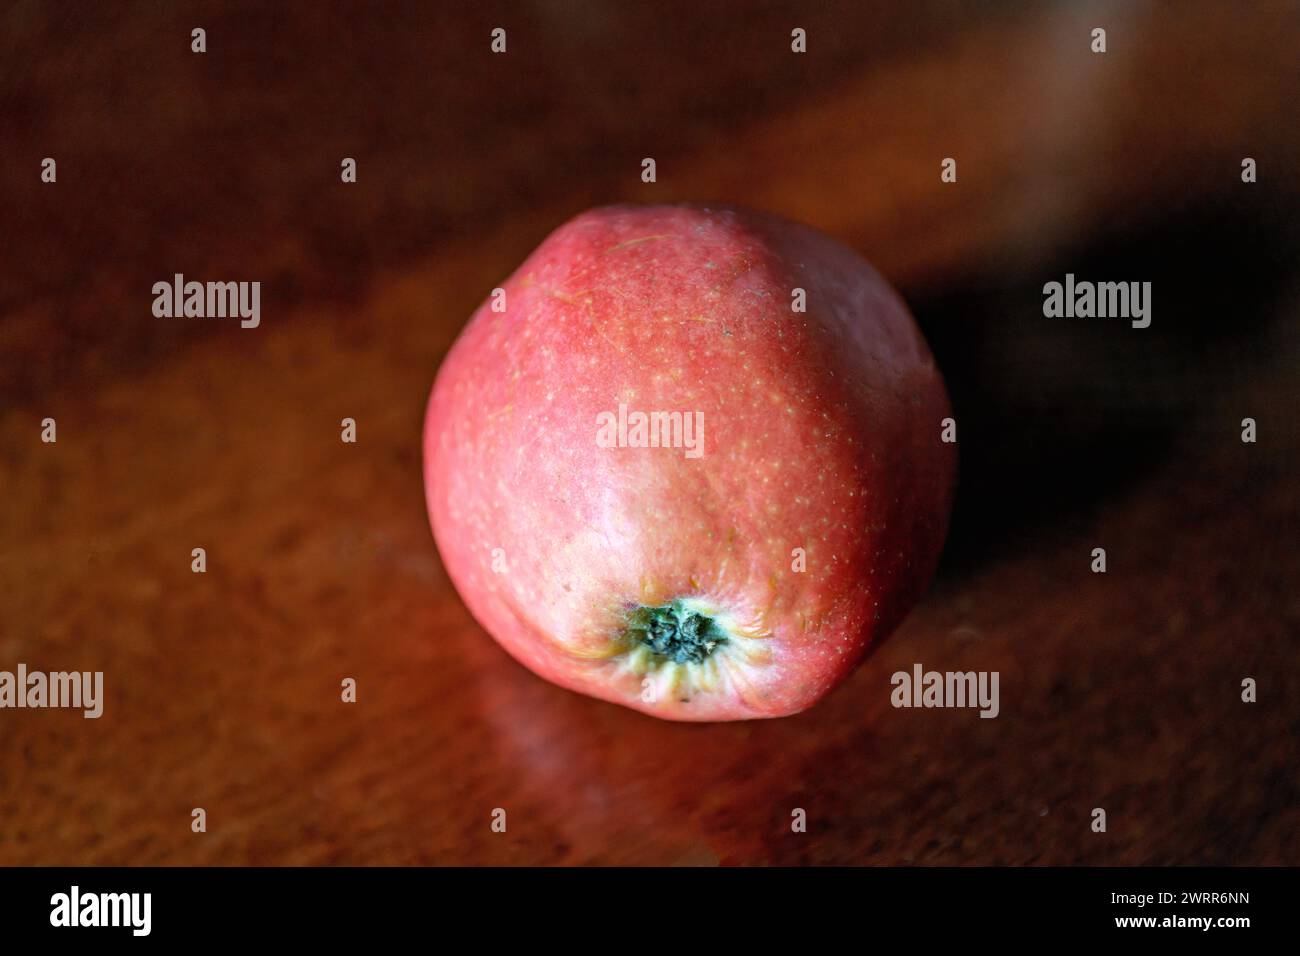 fresh red apple on wooden table Stock Photo